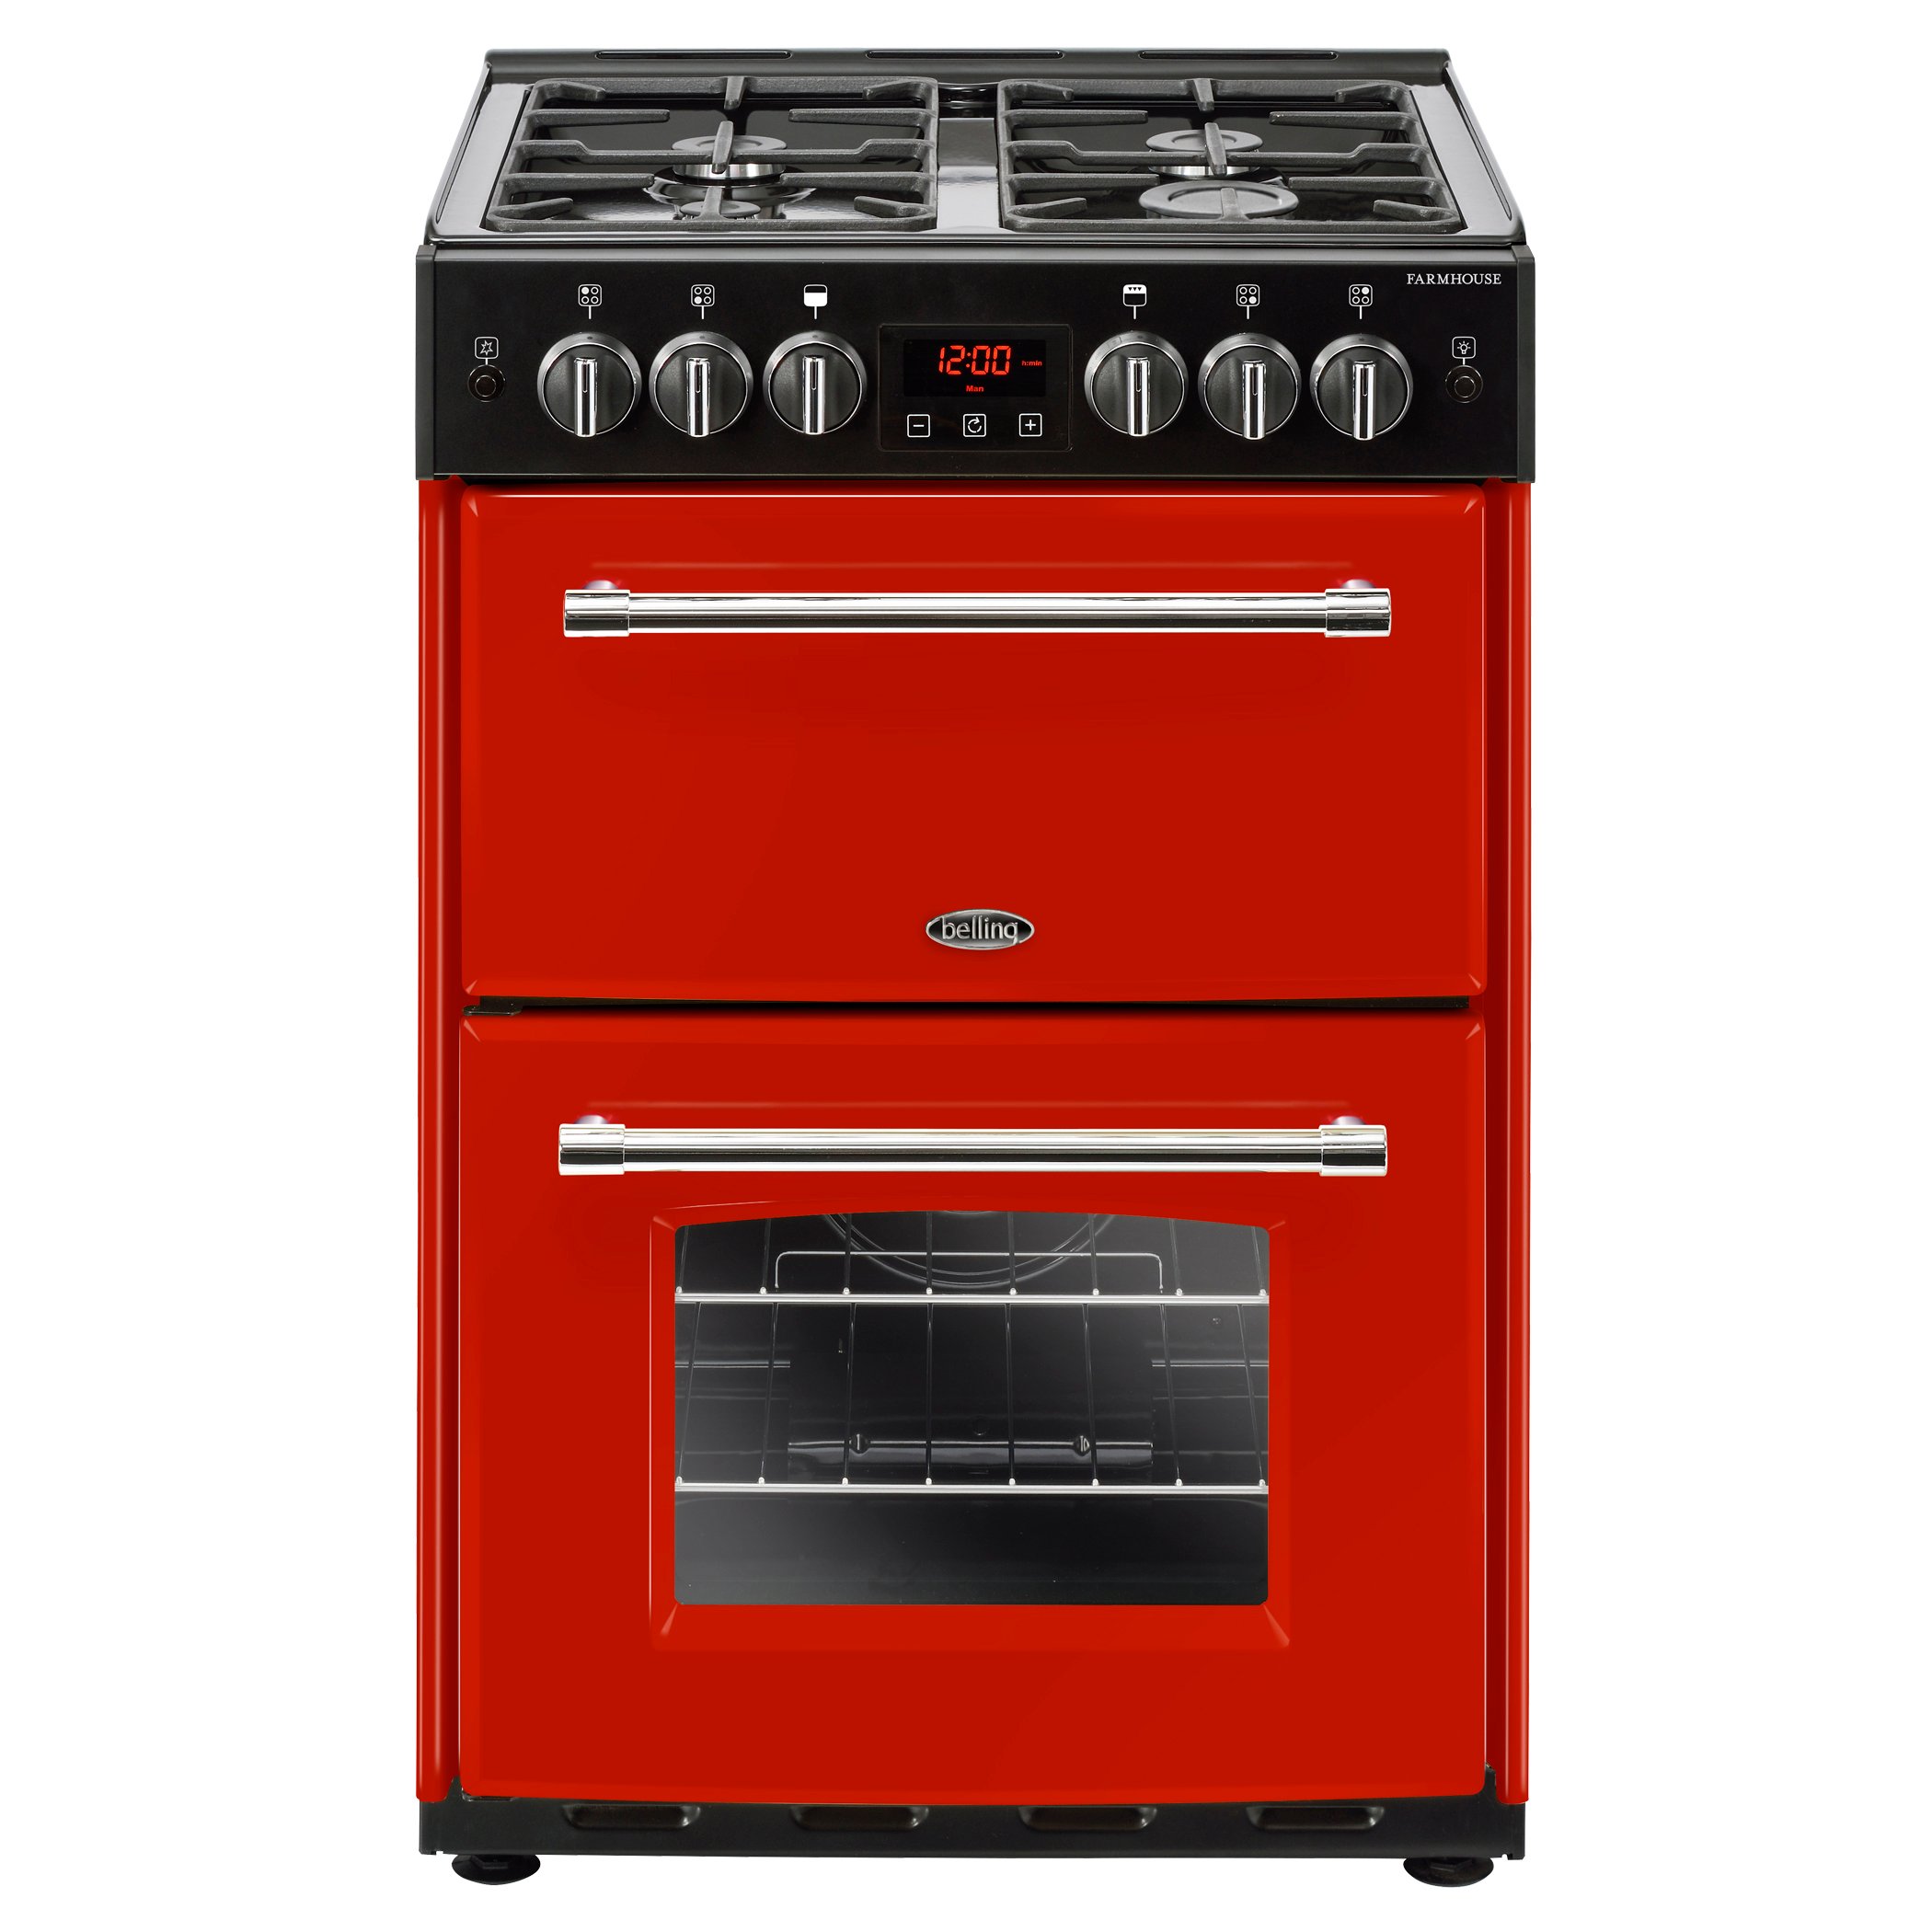 60cm Gas Range Cooker With A 4 Burner Gas Hob, Conventional Gas Oven & Electric Grill and Conventional Gas Main Oven